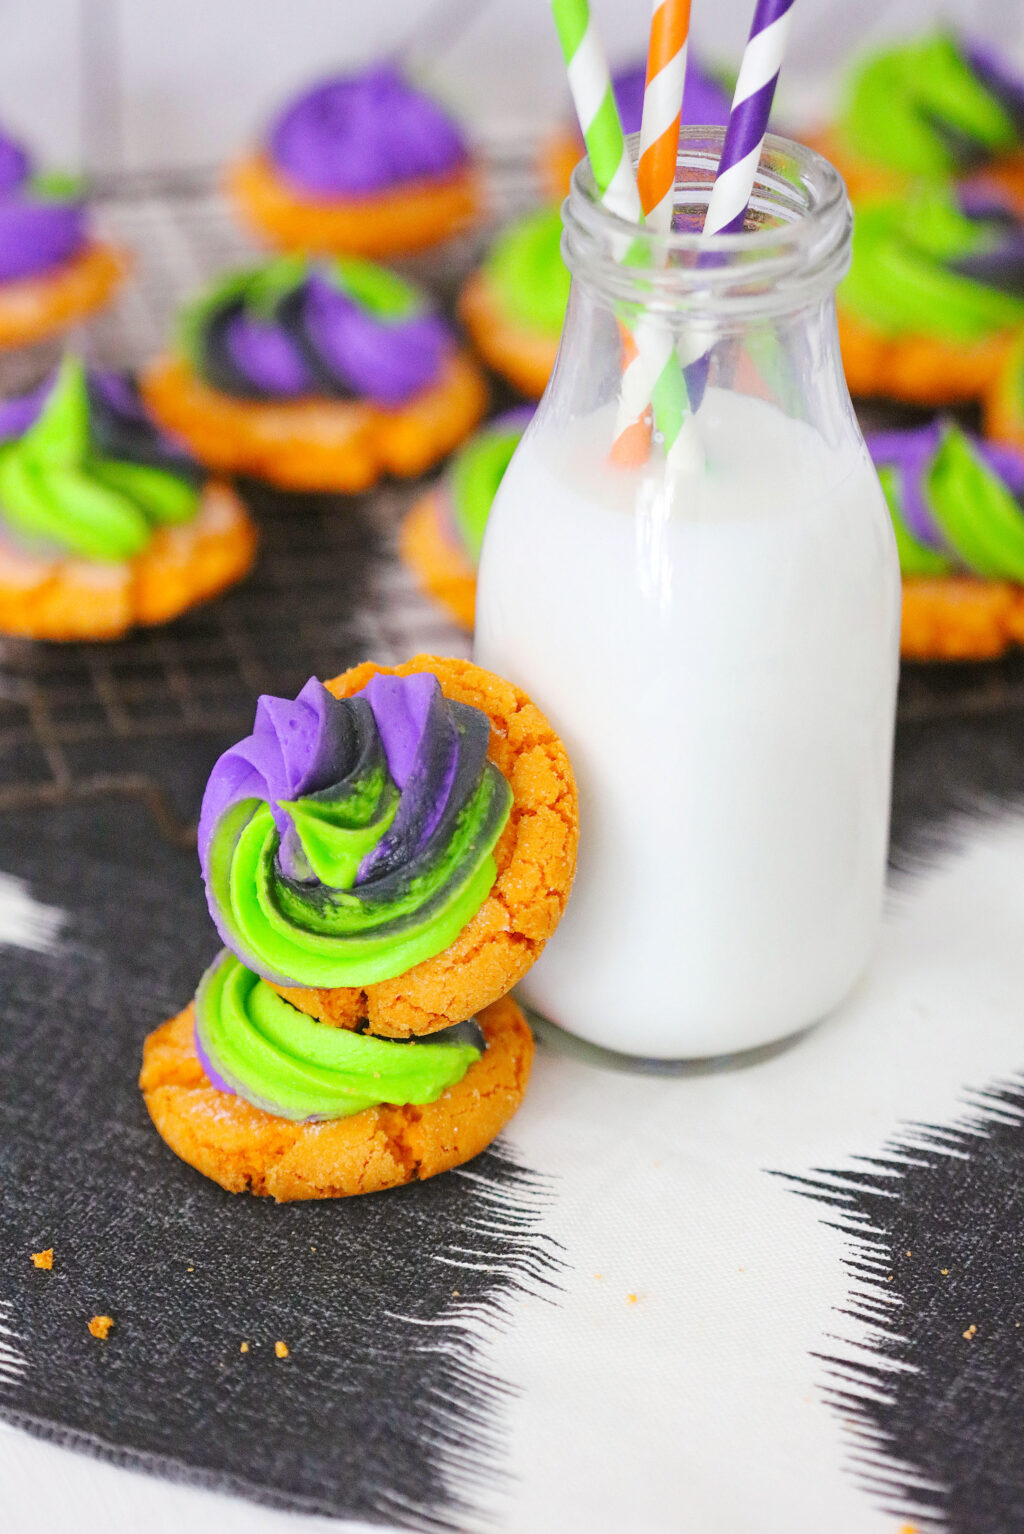 Pumpkin Sugar Cookies With Buttercream Swirl Frosting stacked against a glass of milk